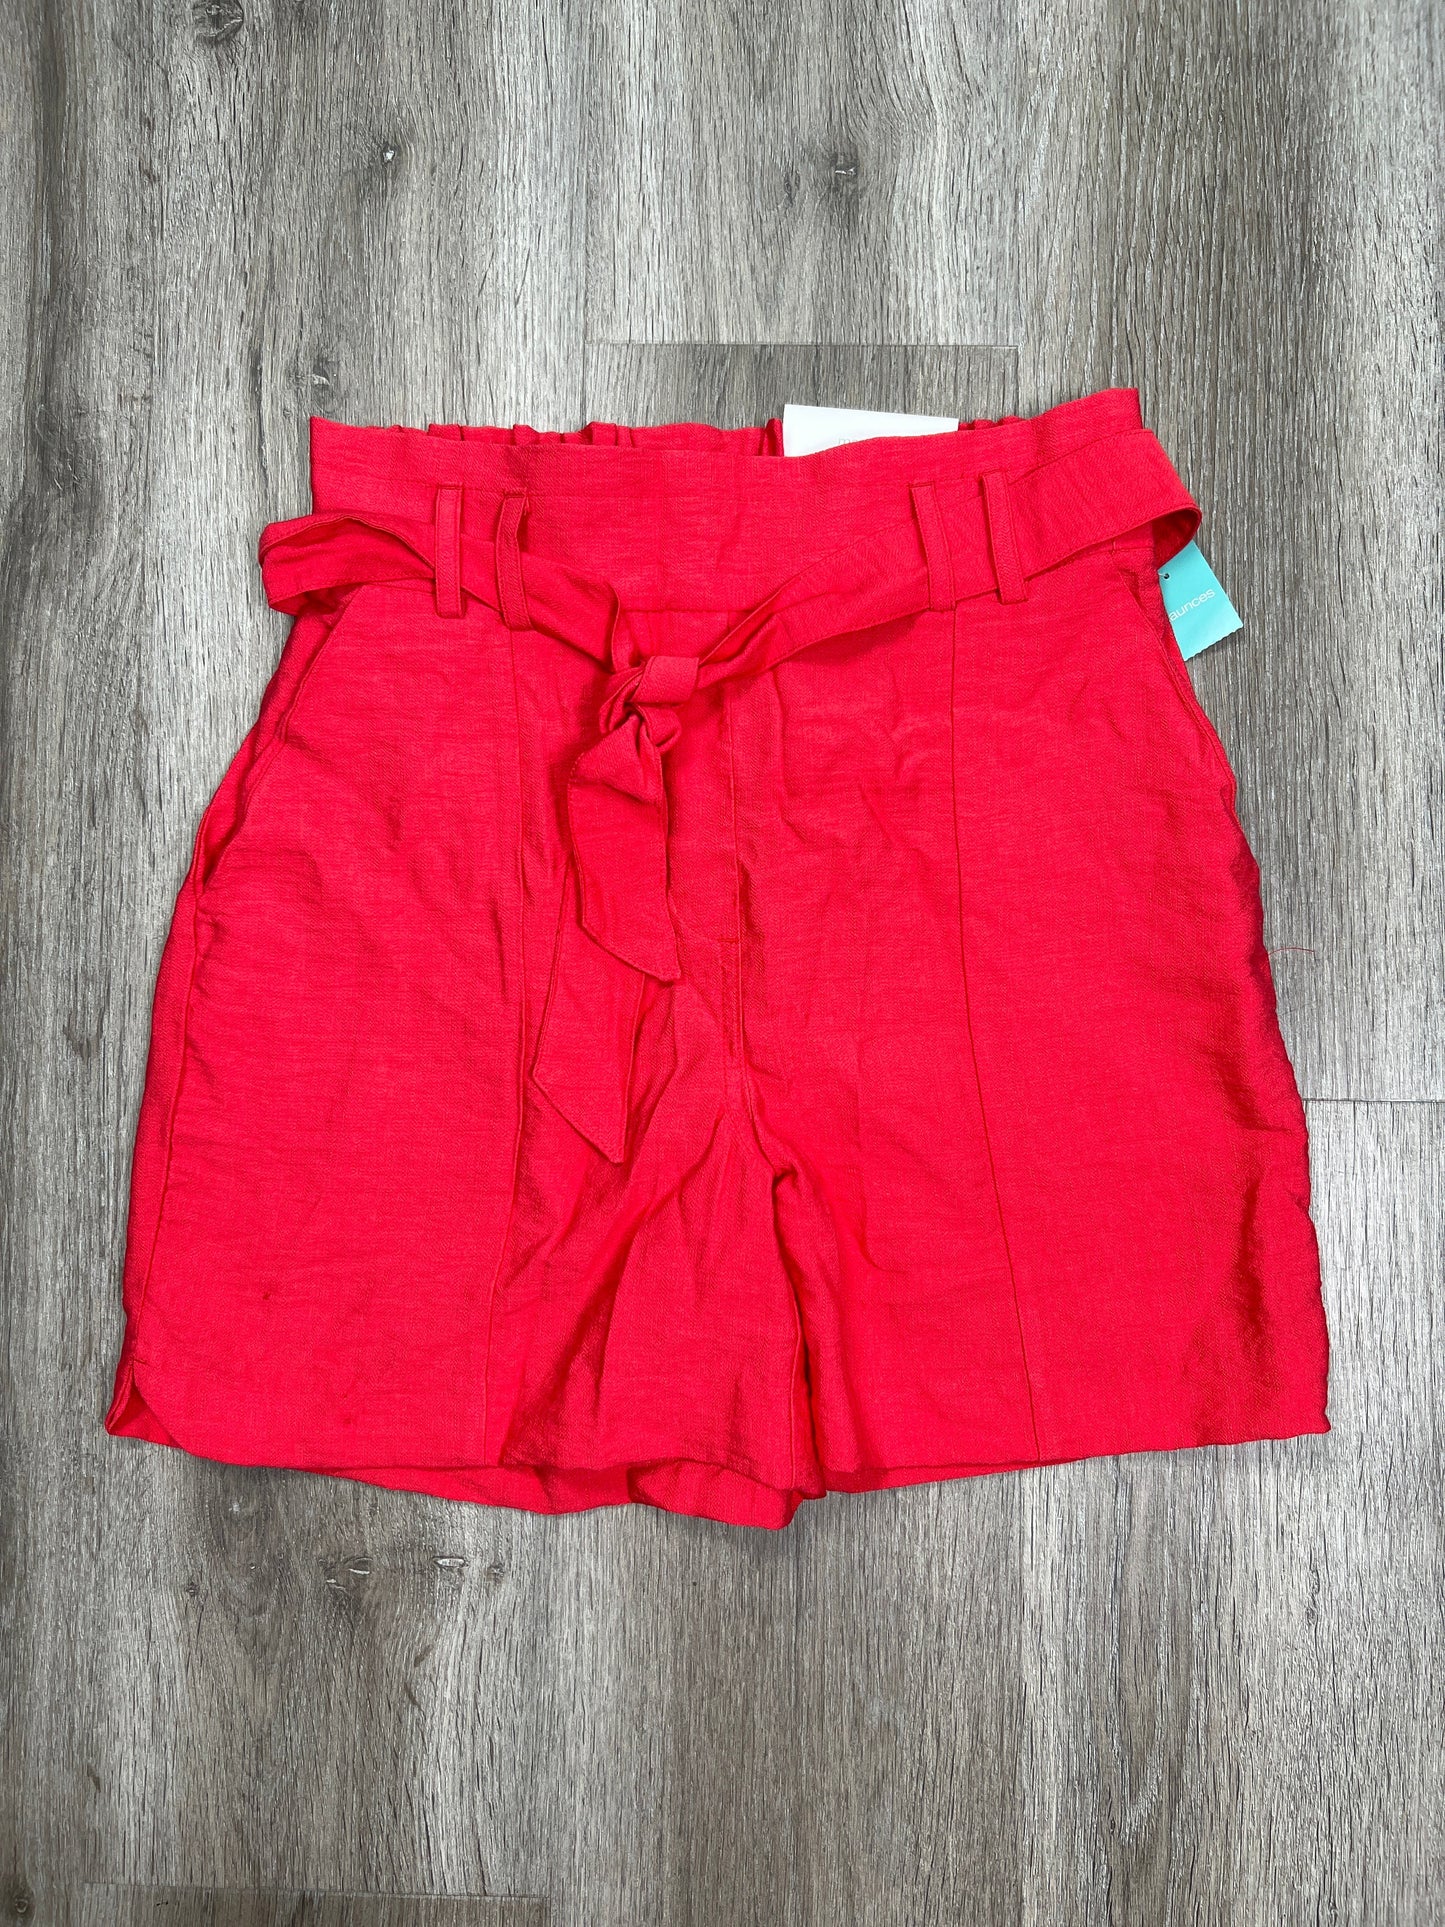 Red Shorts Maurices, Size Xs